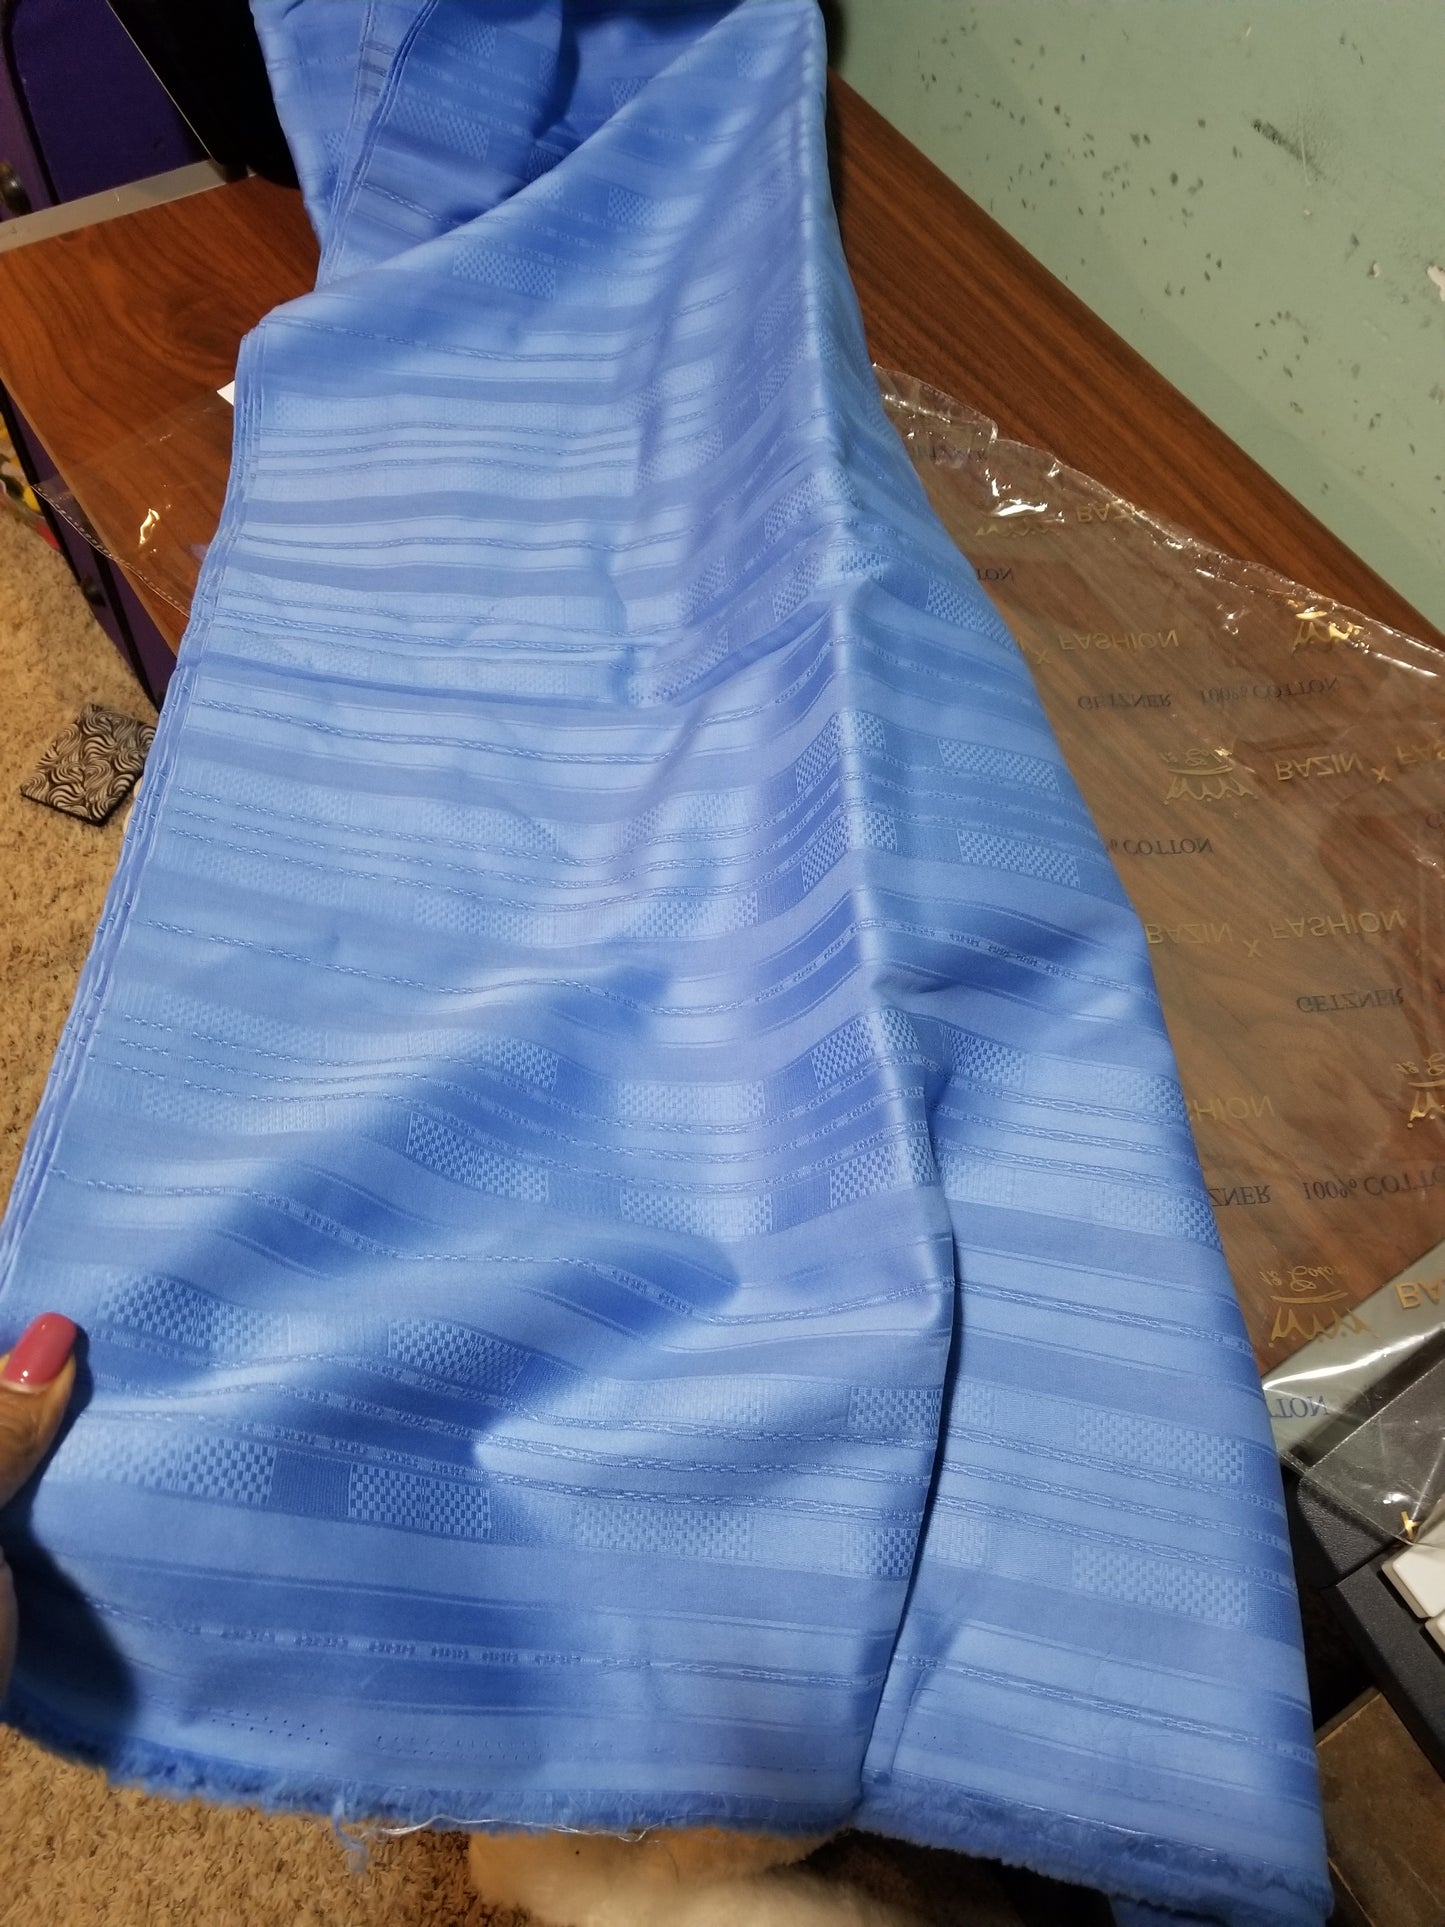 Sky blue Top quality cotton voile  fabric for Nigerian Men native outfit. Soft quality fabric. Can be use for agbada/3pc outfit for men. Sold per 5yds. Price is for 5yds